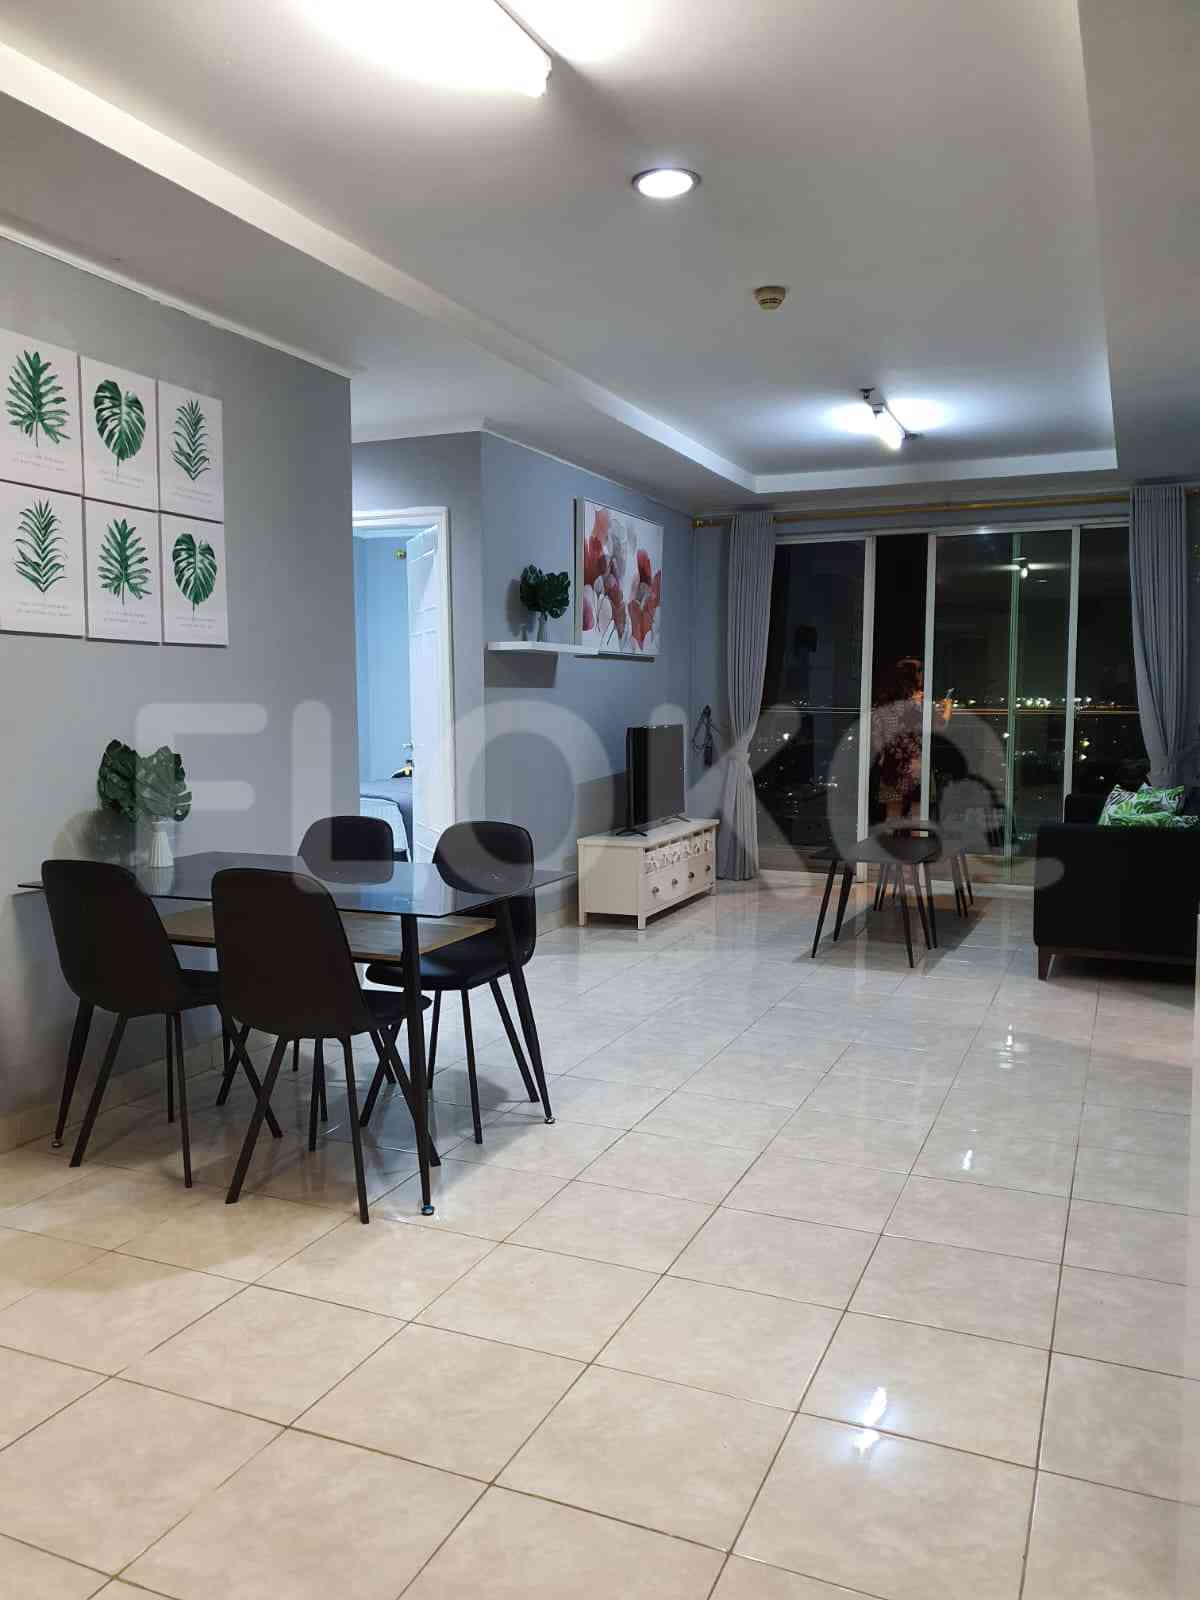 4 Bedroom on 15th Floor for Rent in MOI Frenchwalk - fke28a 1